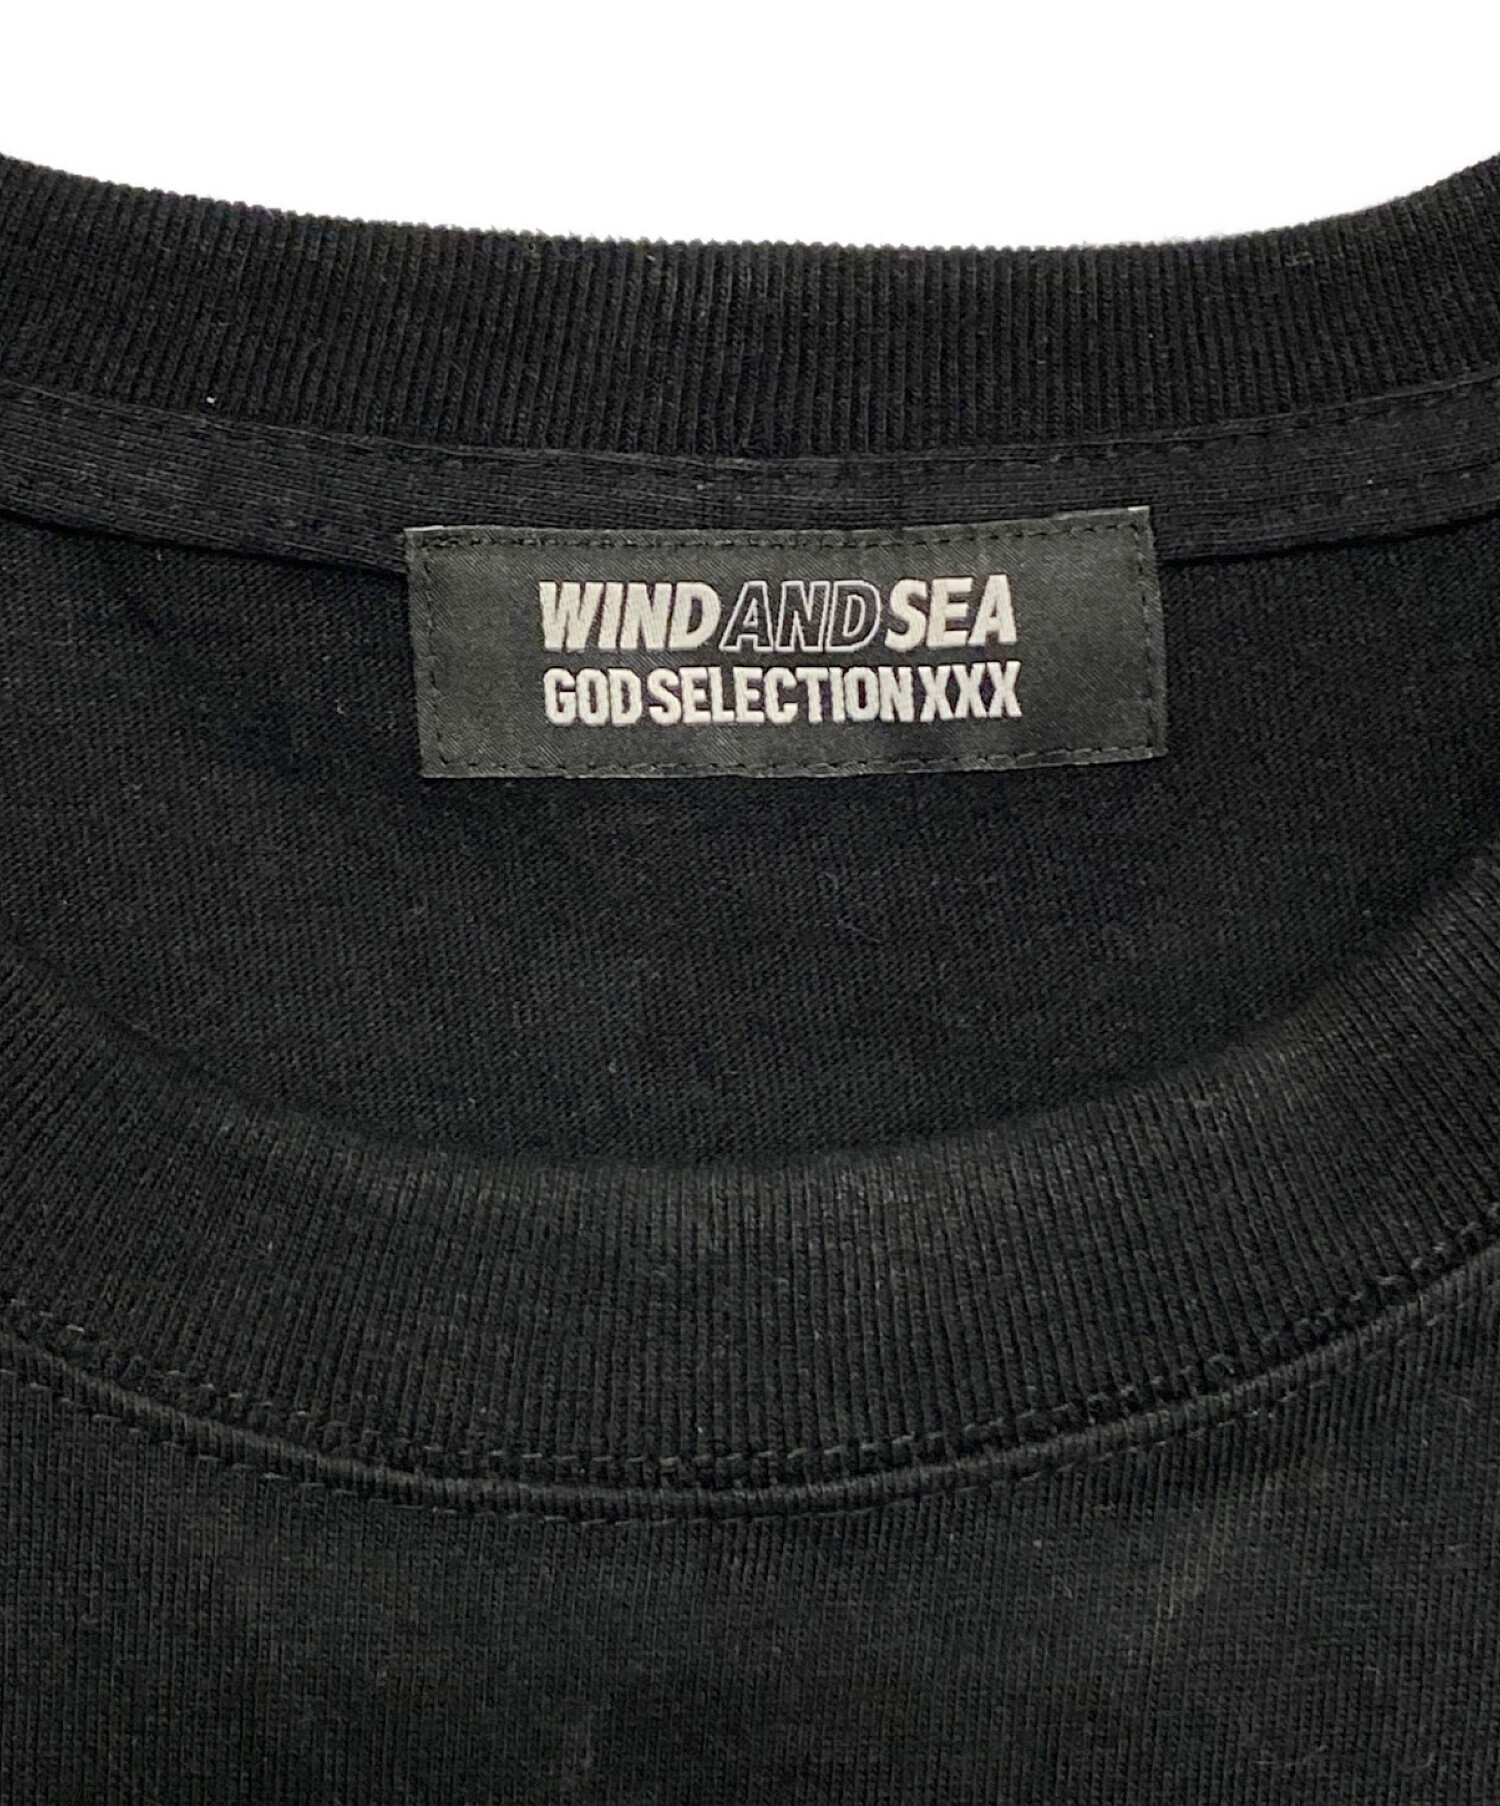 WIND AND SEA × GOD SELECTION Tシャツ　黒　XL